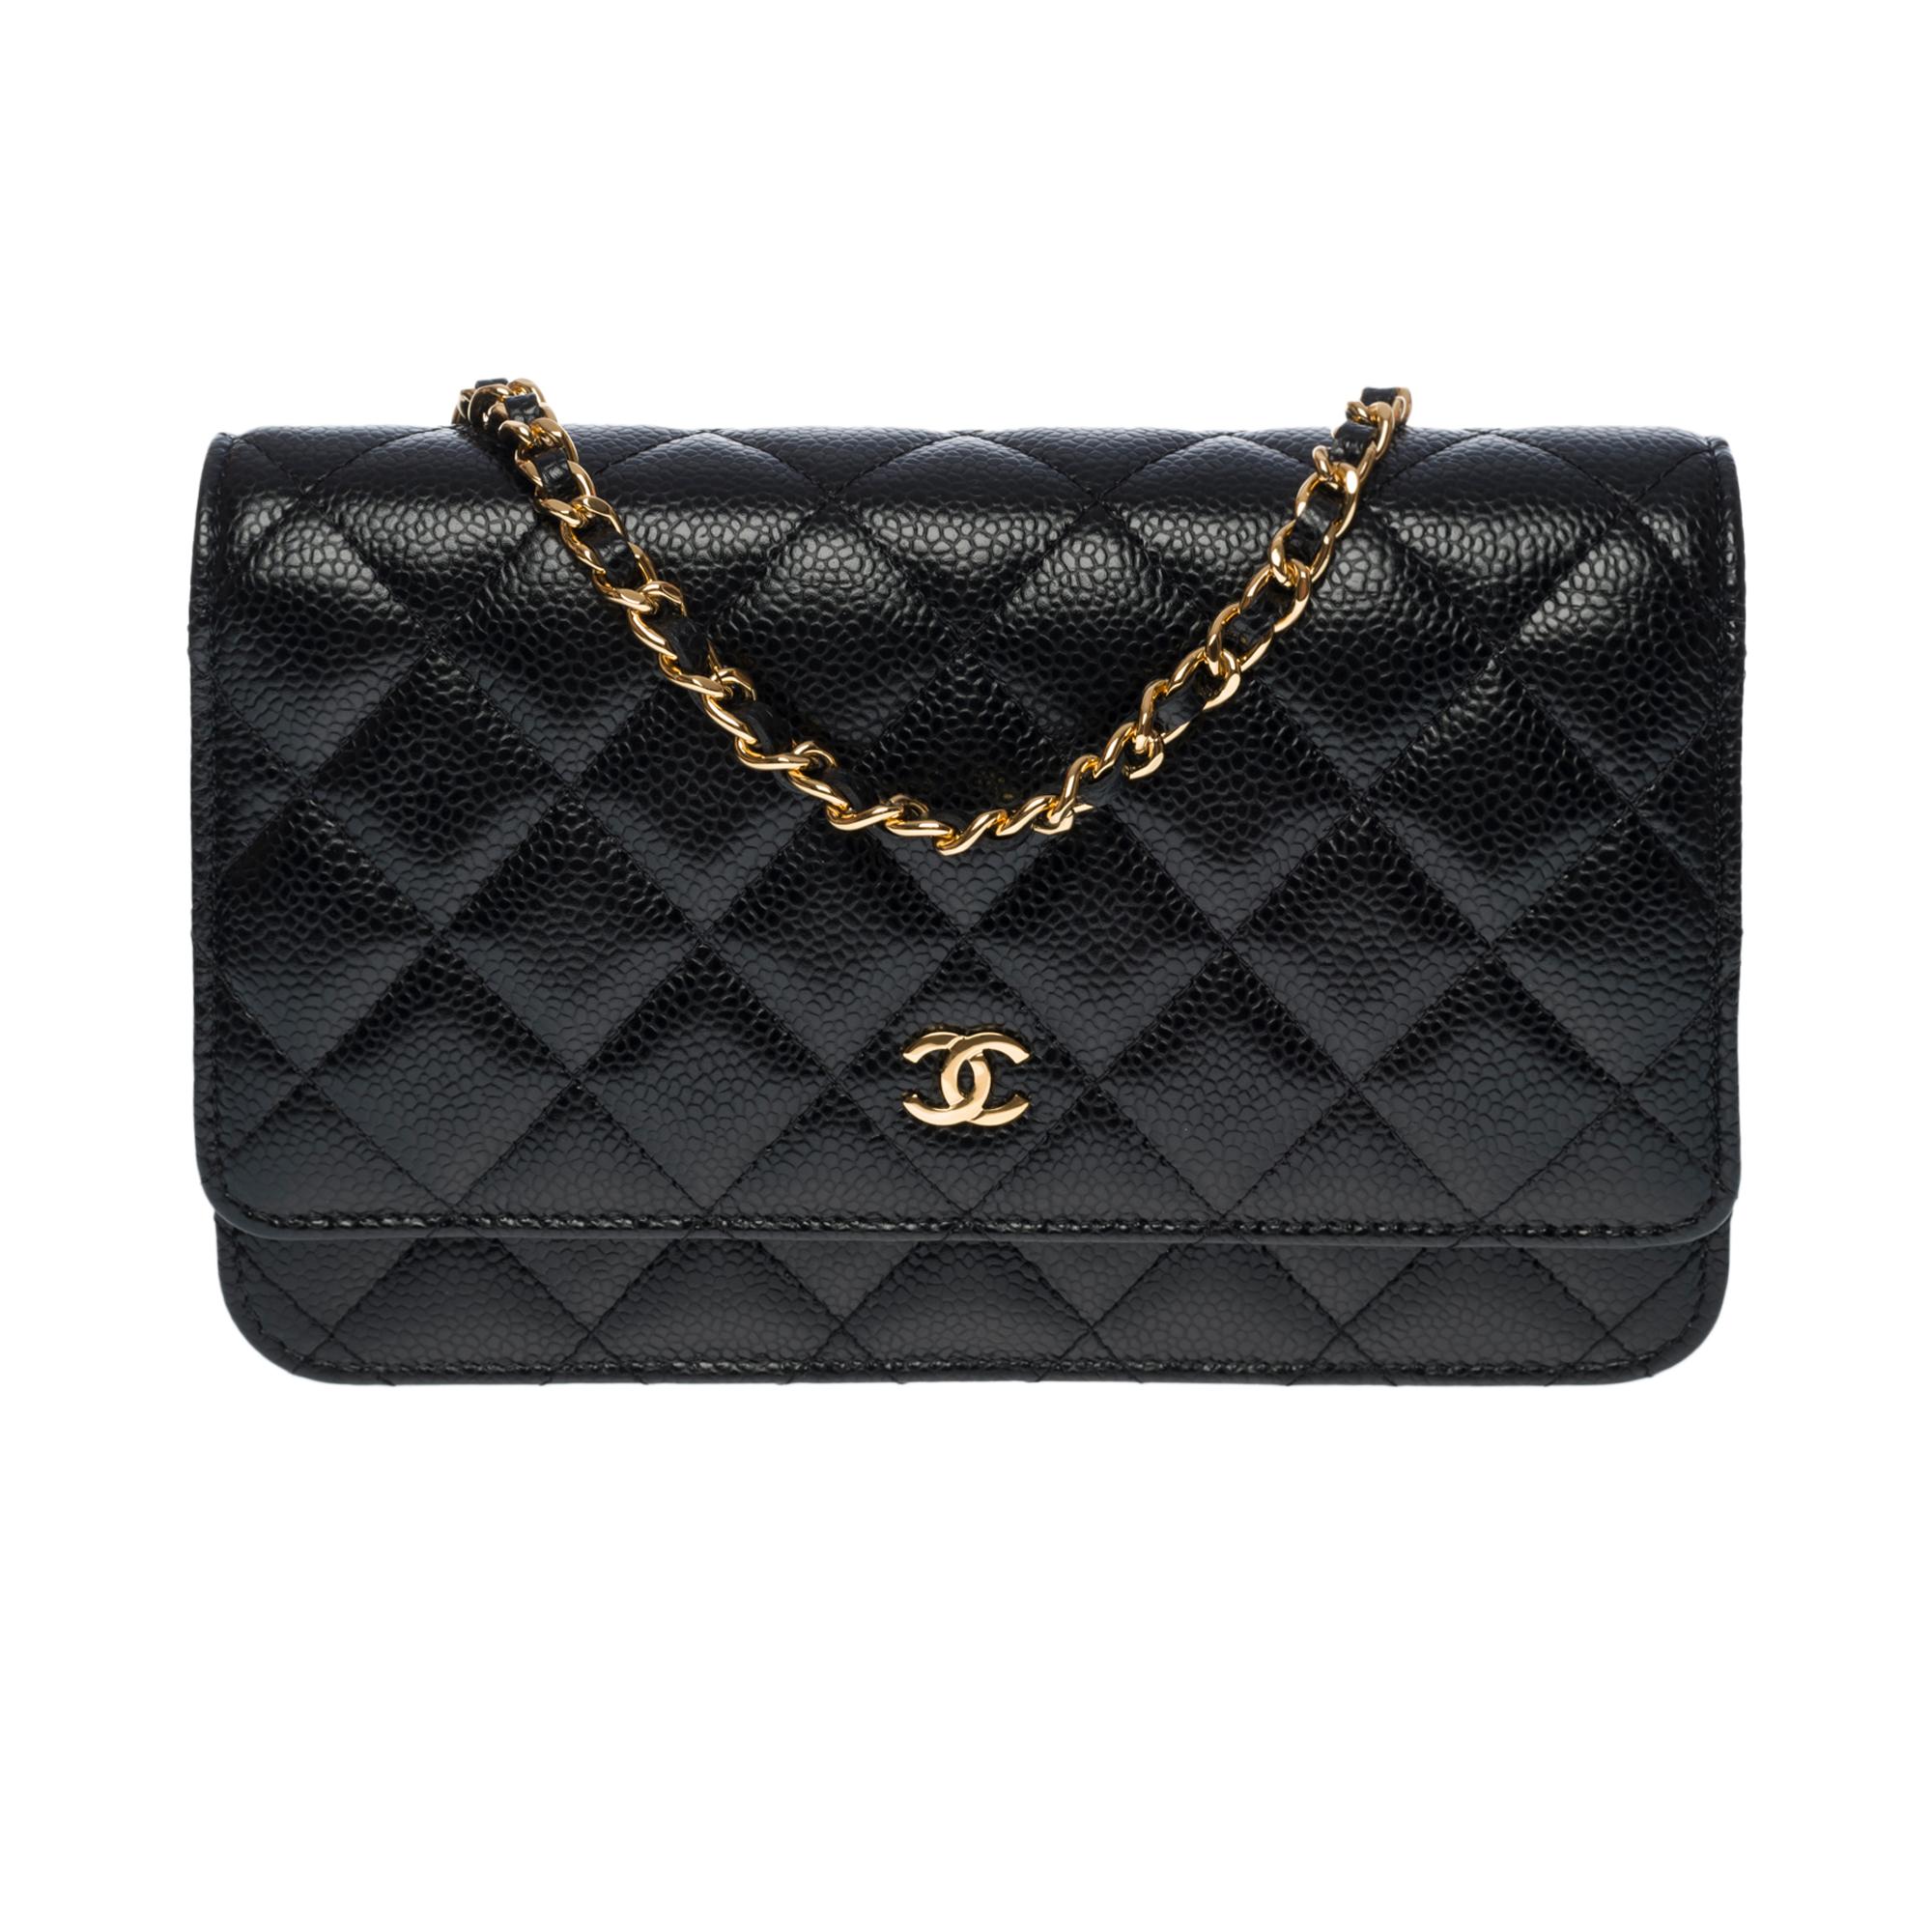 Lovely Chanel Wallet On Chain (WOC) shoulder bag in black caviar quilted leather, gold-plated metal hardware, a gold-plated metal chain handle interwoven with black leather for a shoulder and crossbody carry


Gold Metal Flap Closure
A patch pocket